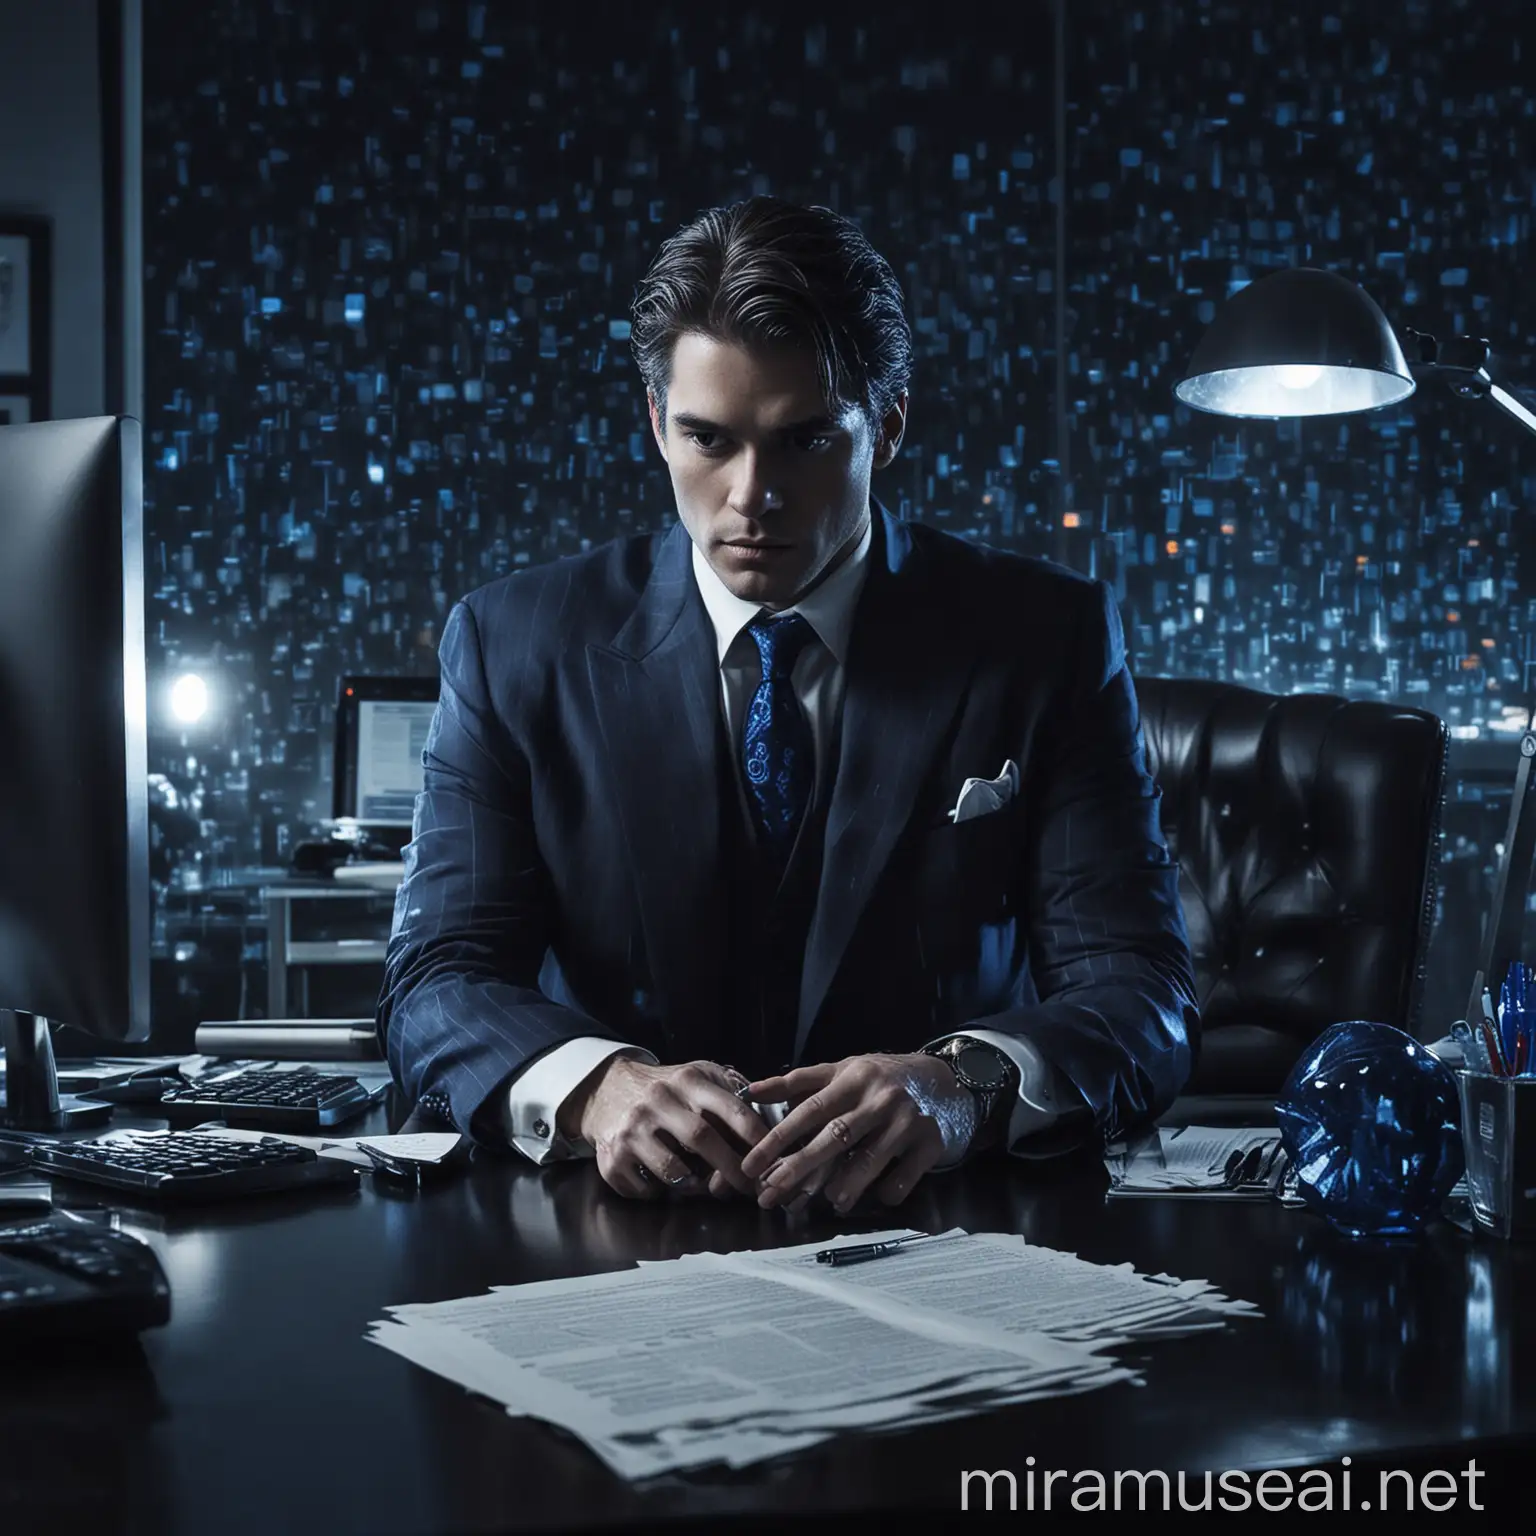 Powerful Businessman in Midnight Office with Luxurious Blue Decor